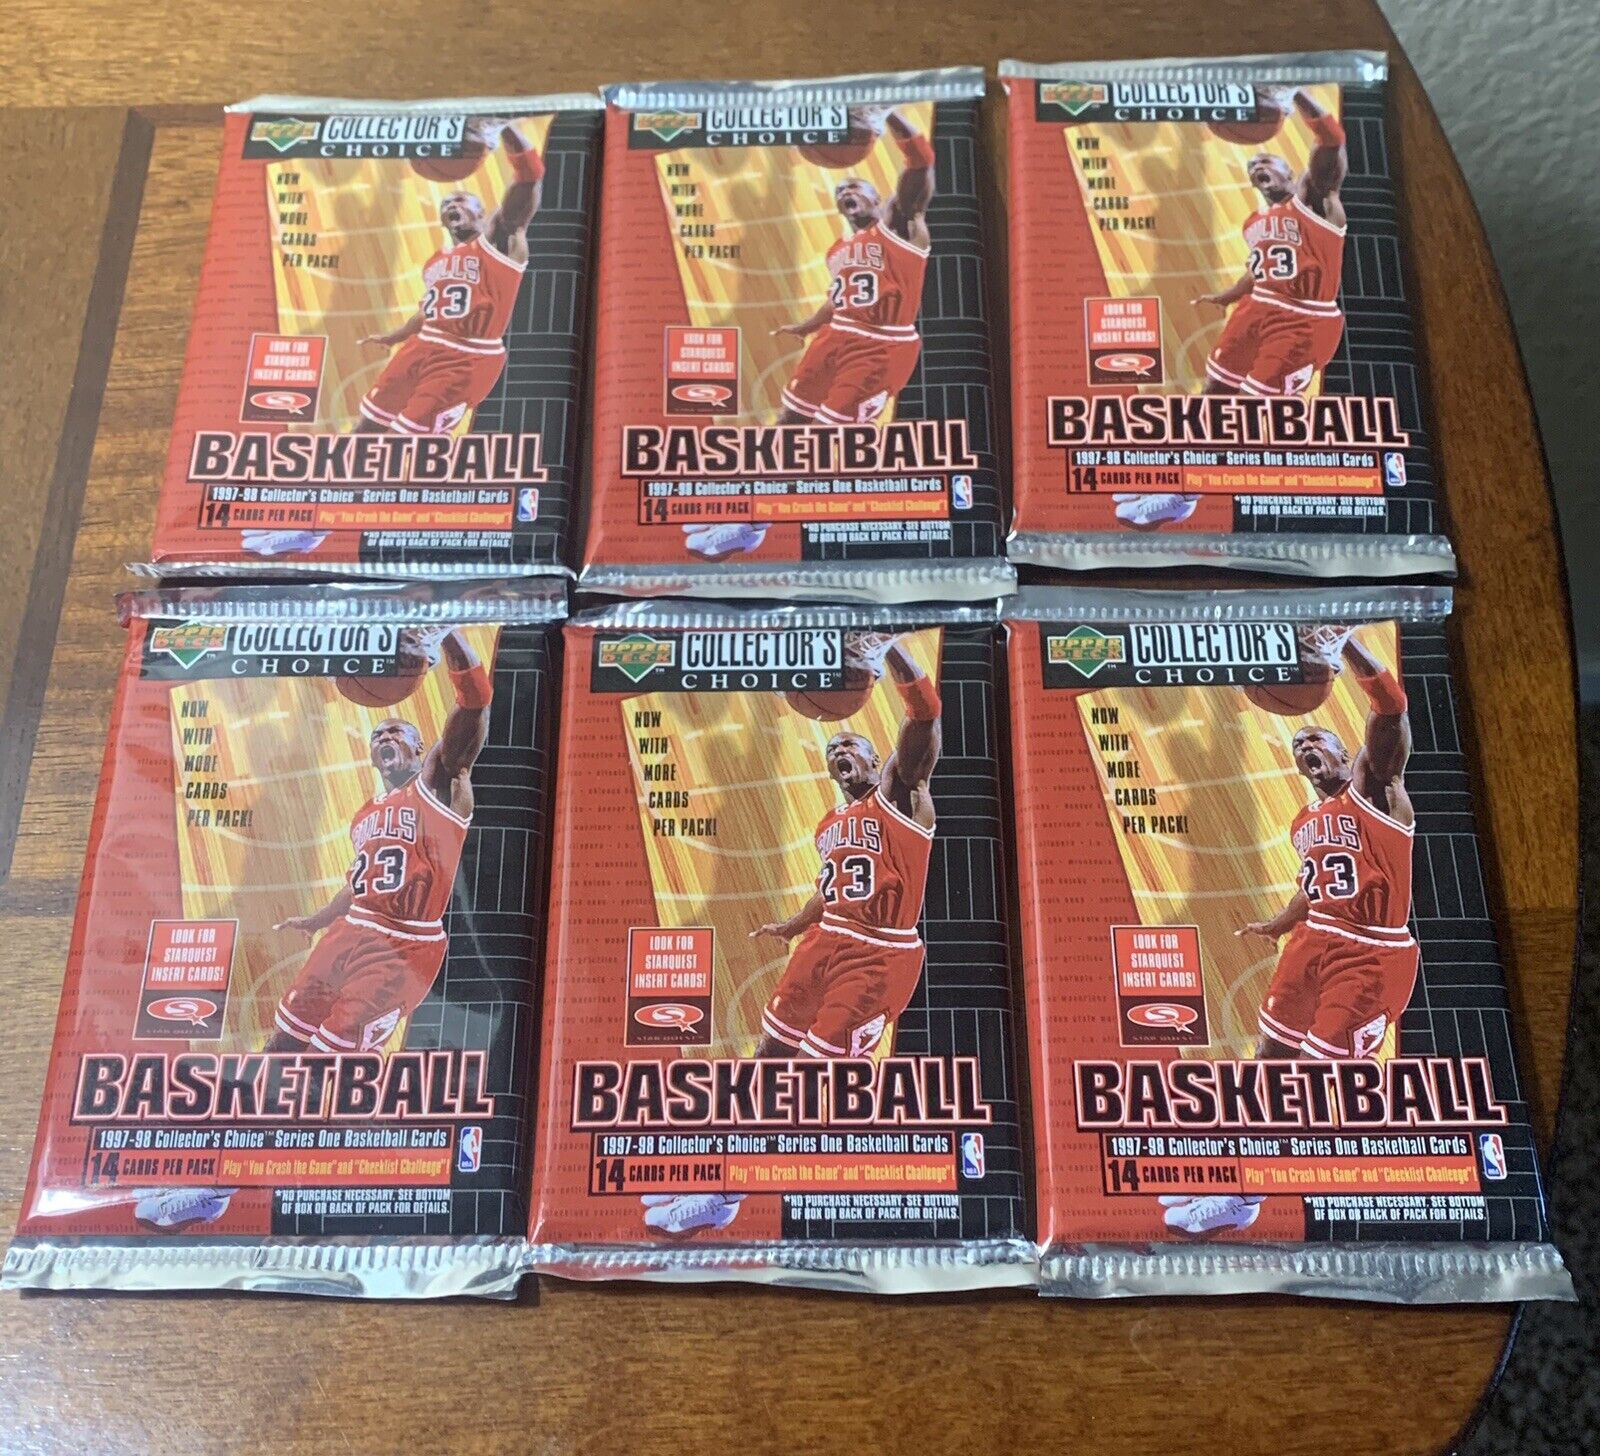 6 x 1997-98 Upper Deck Collectors Choice Series 1 Basketball Pack with 14 cards